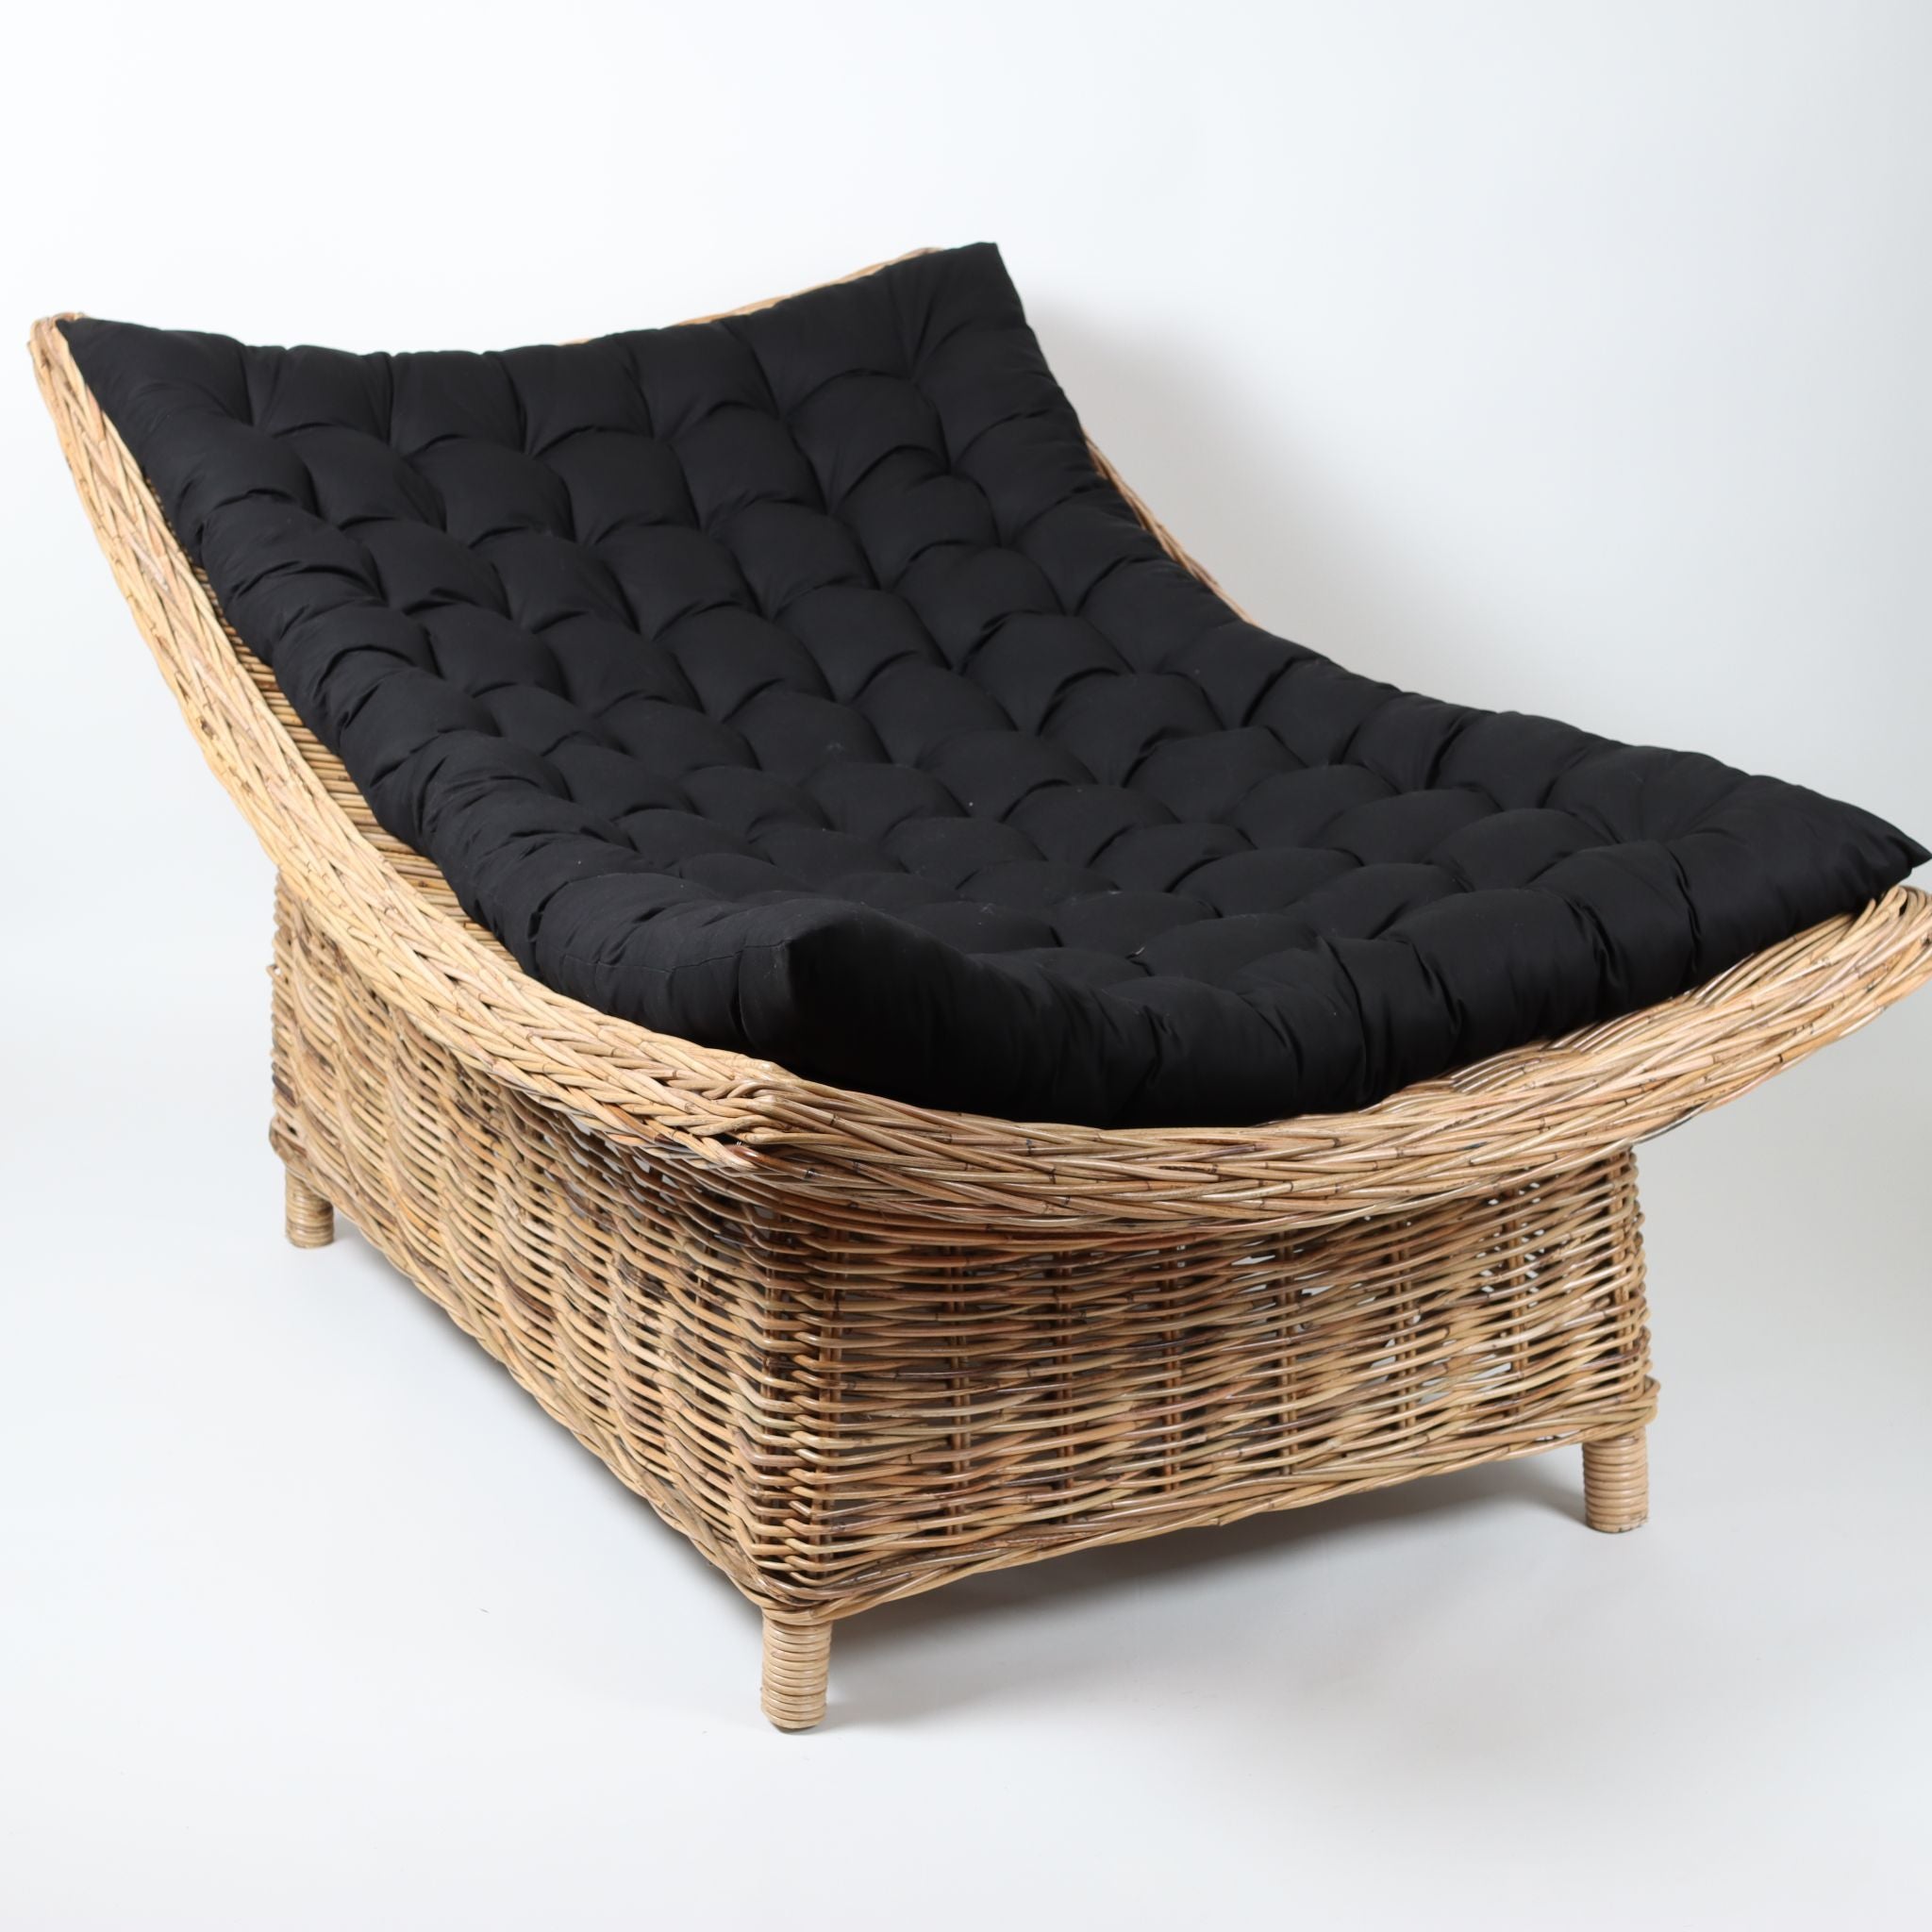 Natural Wicker Rattan Daybed with Black Cotton Mattress